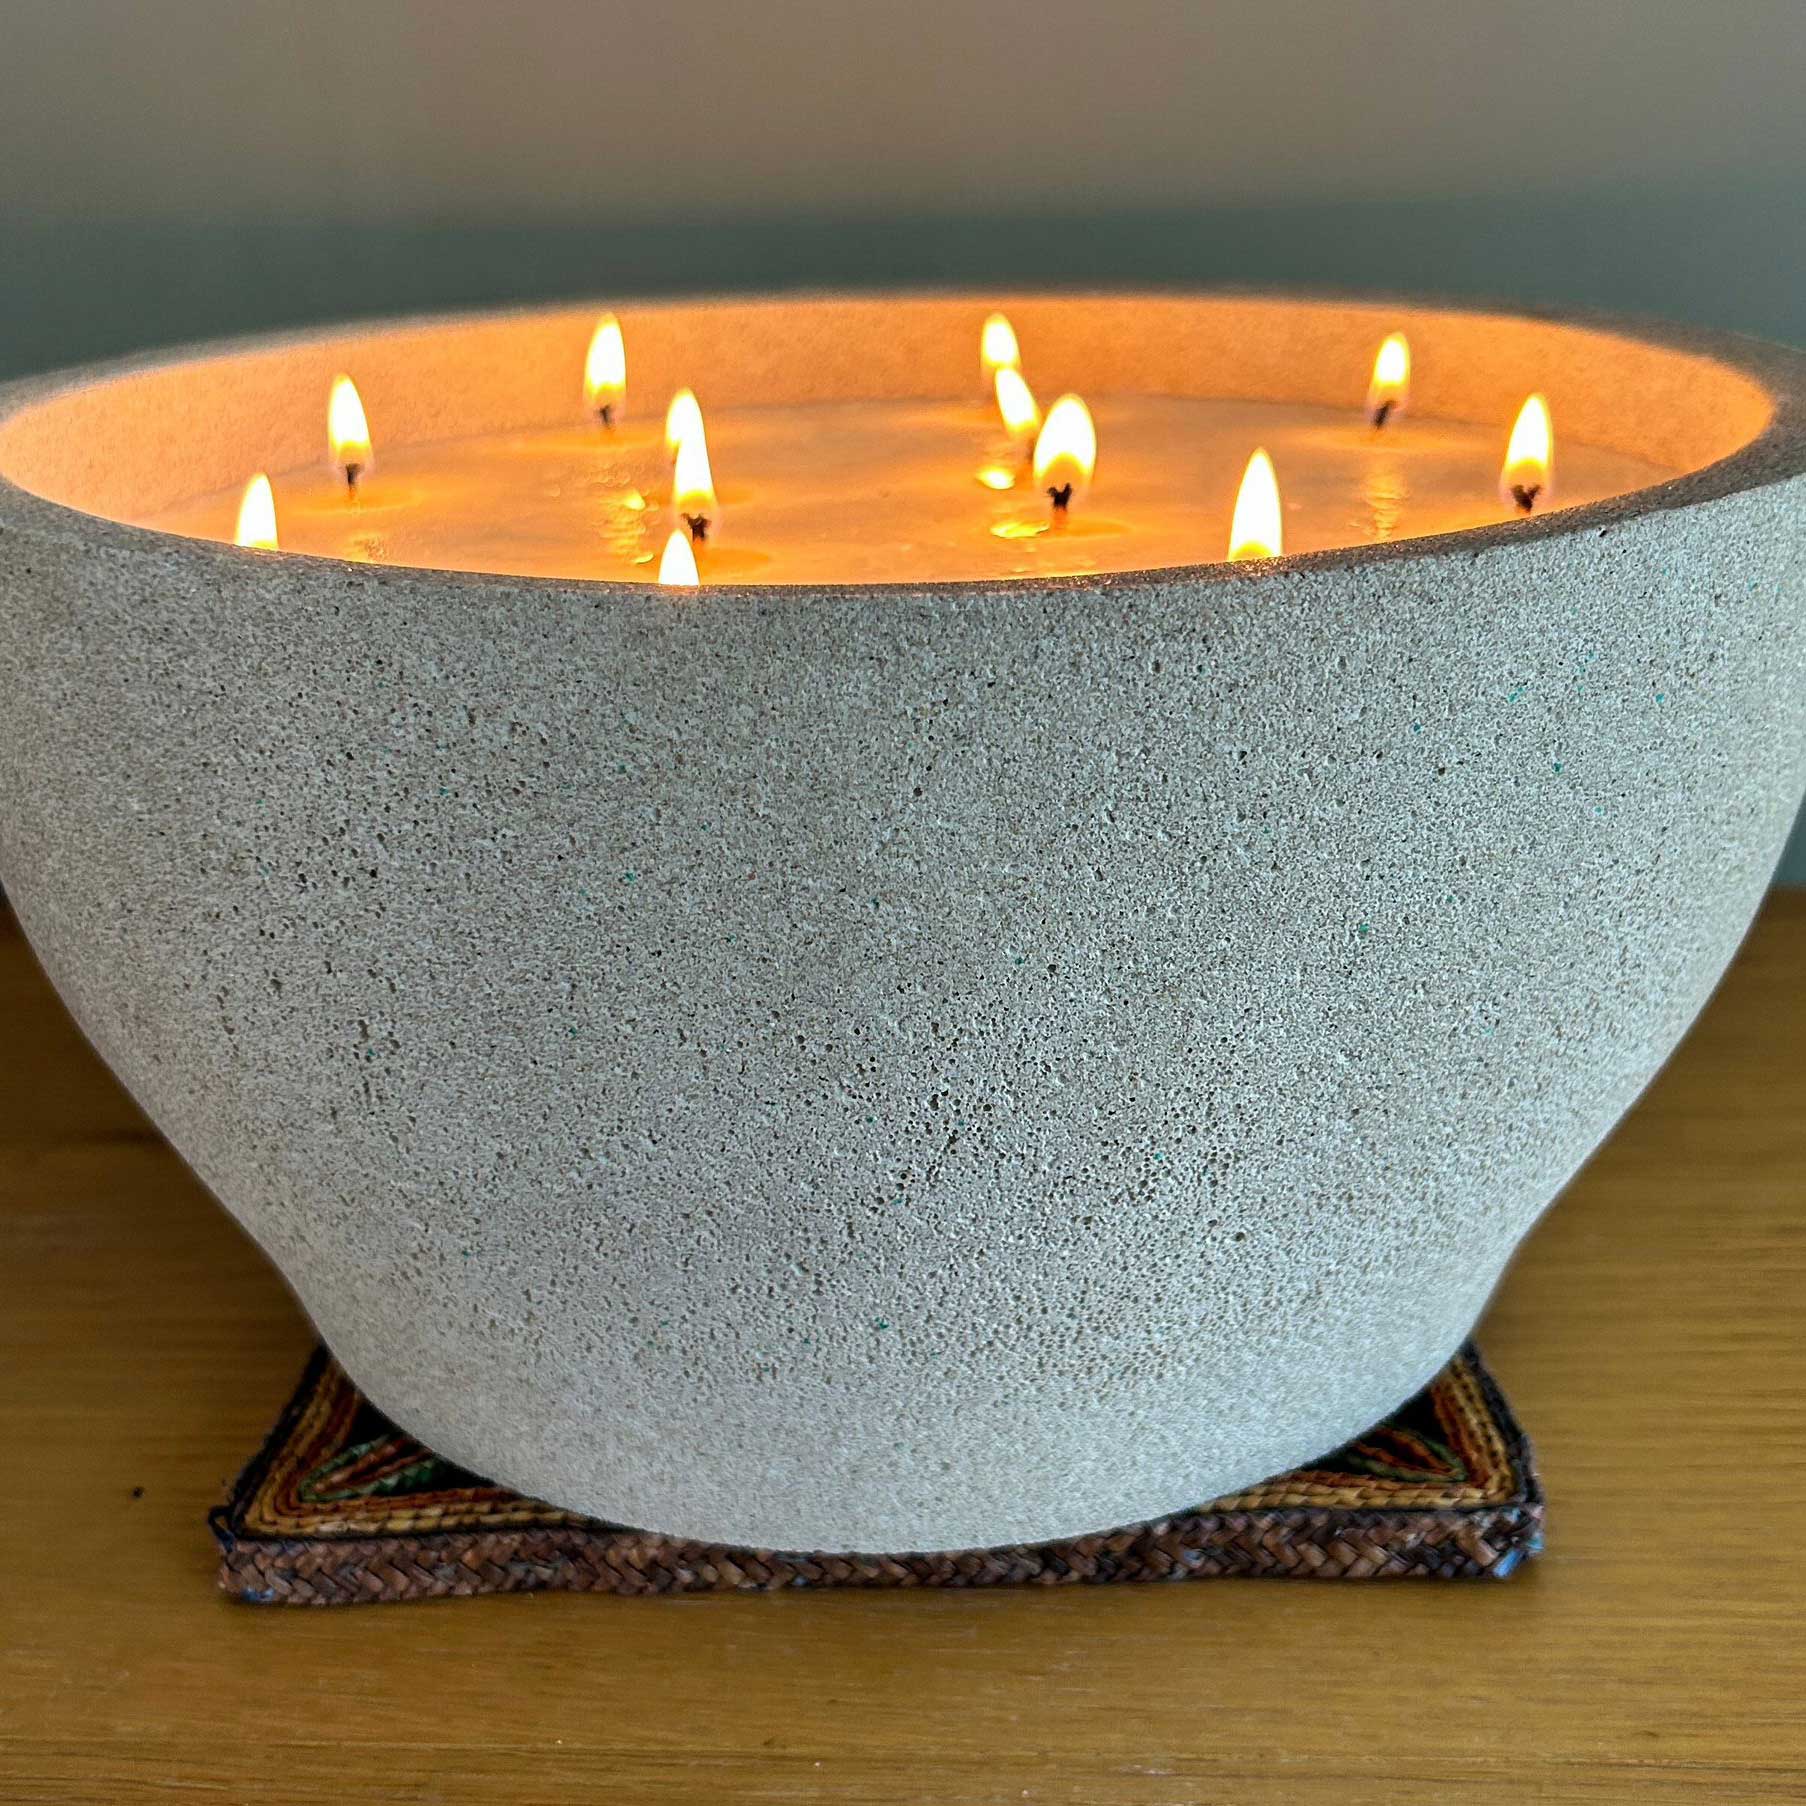 Extra large 12 wick candle lit from the side